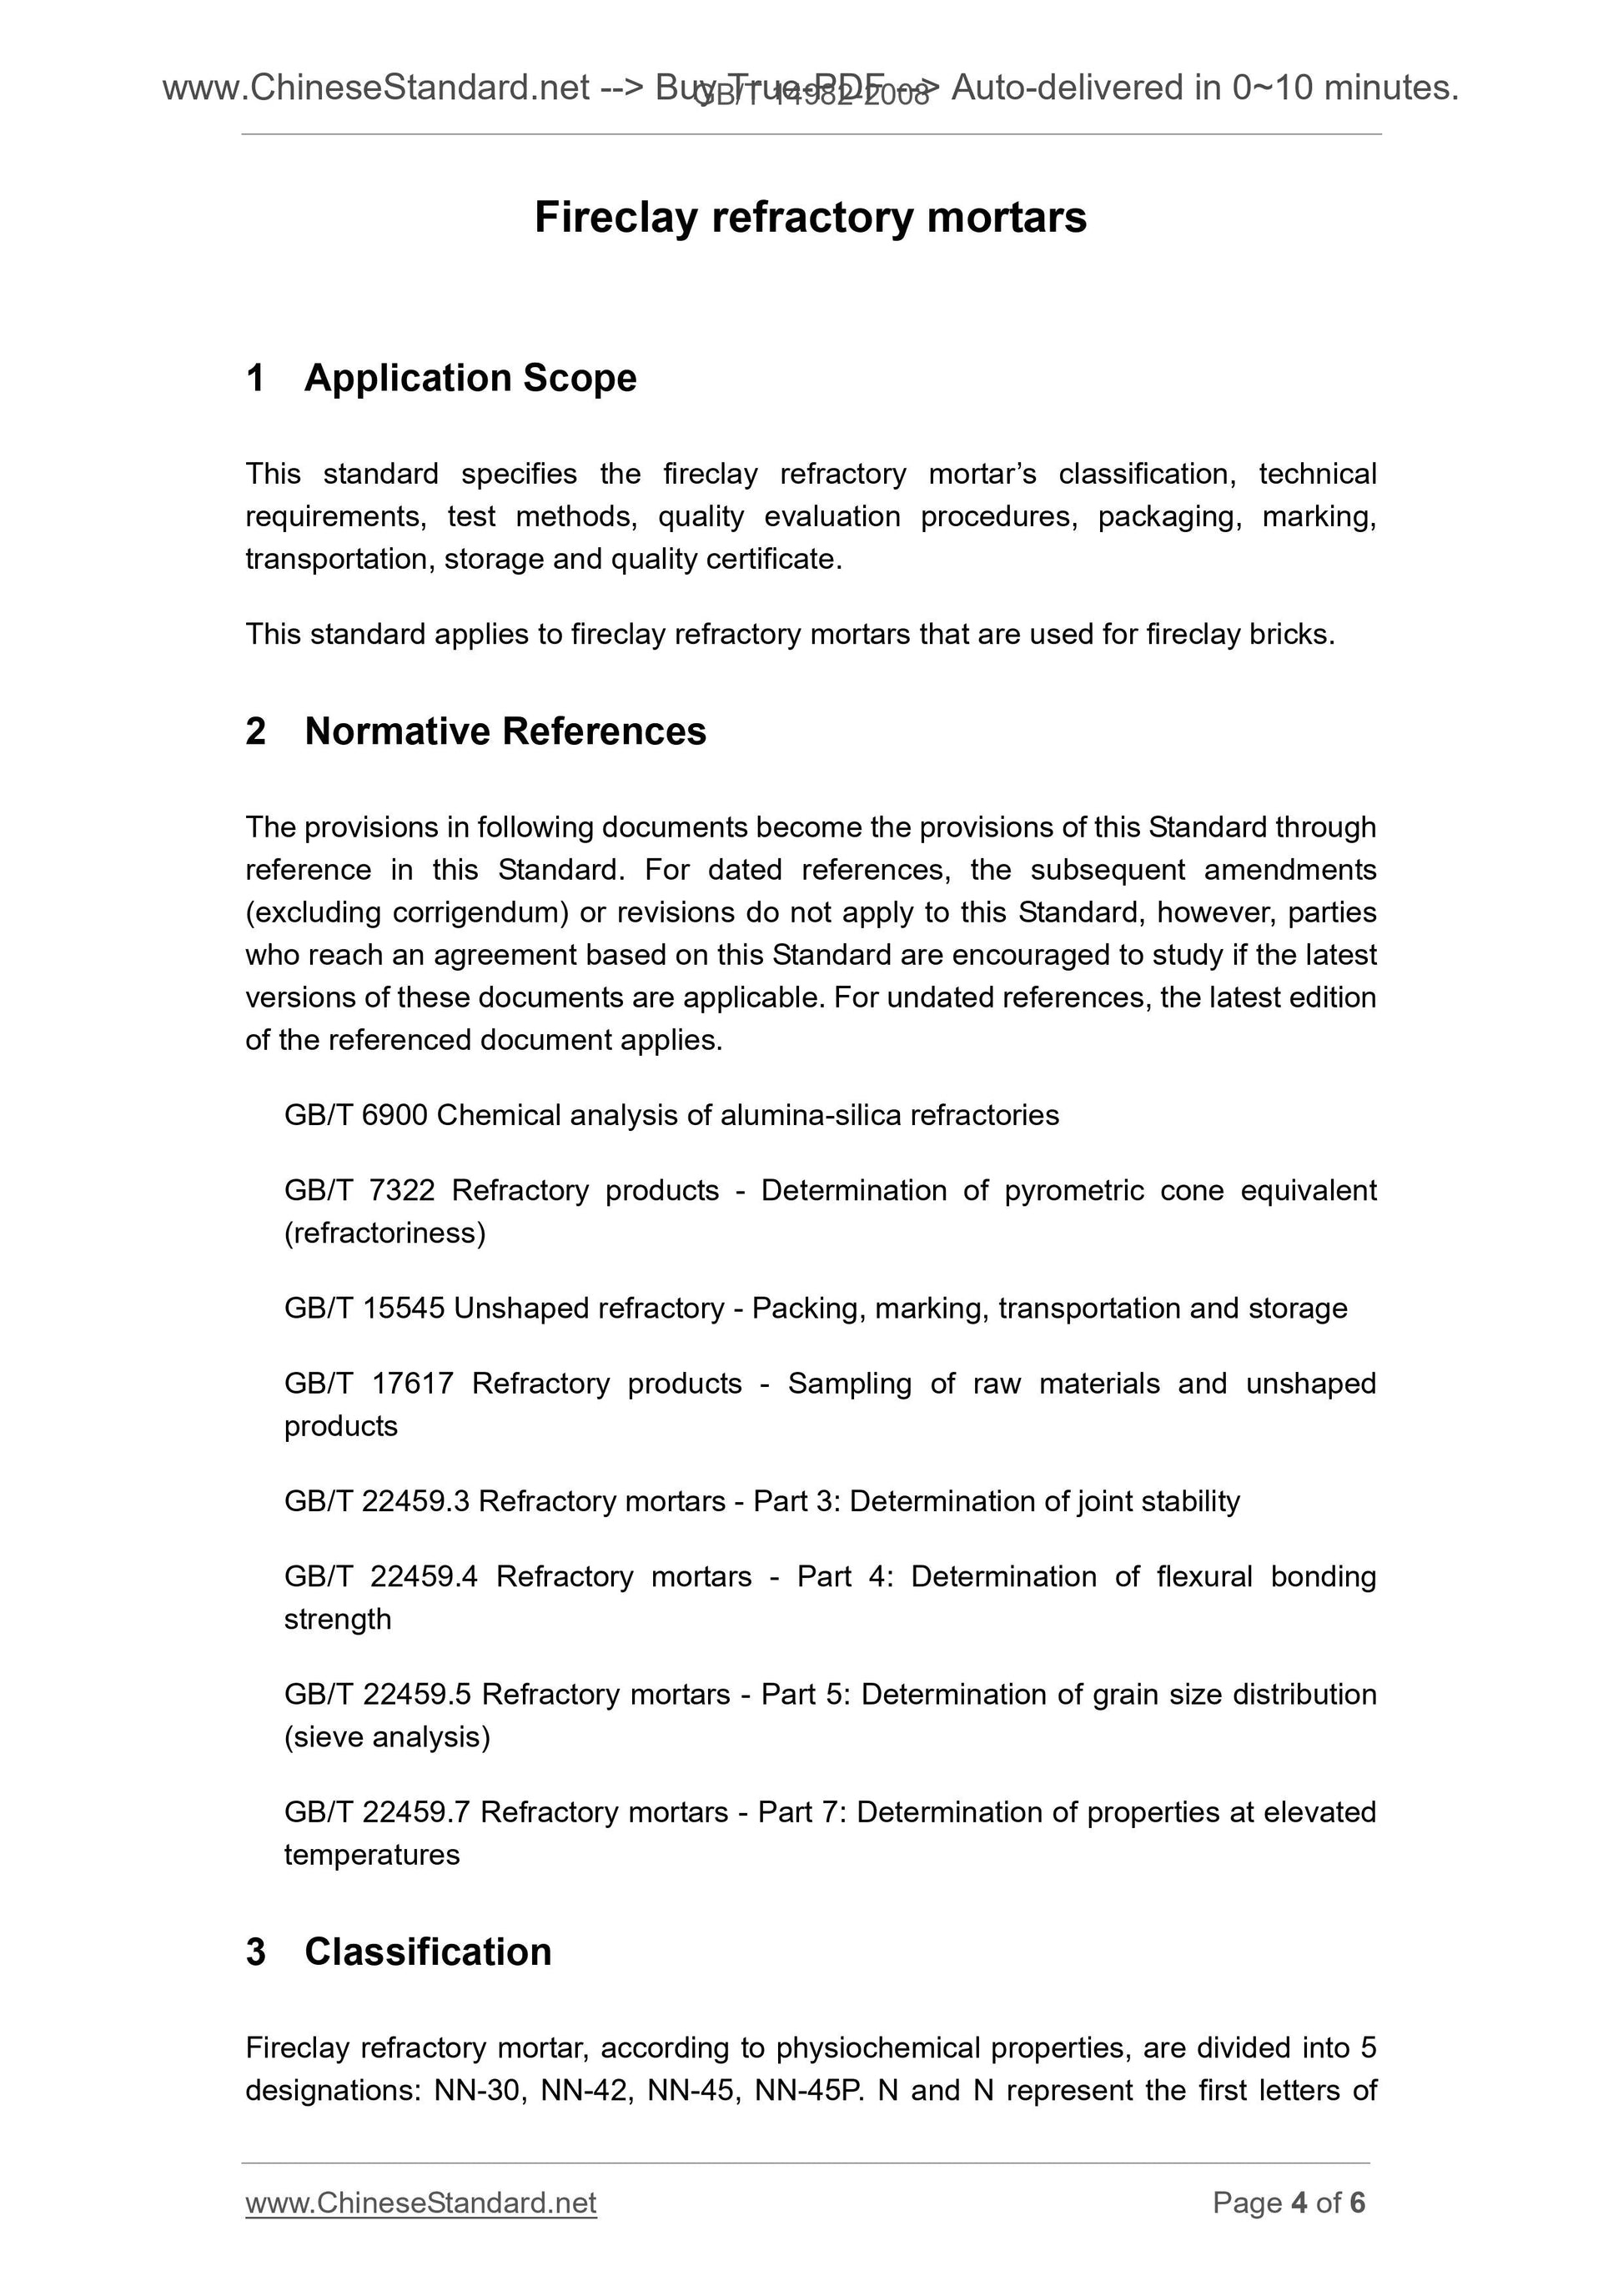 GB/T 14982-2008 Page 4